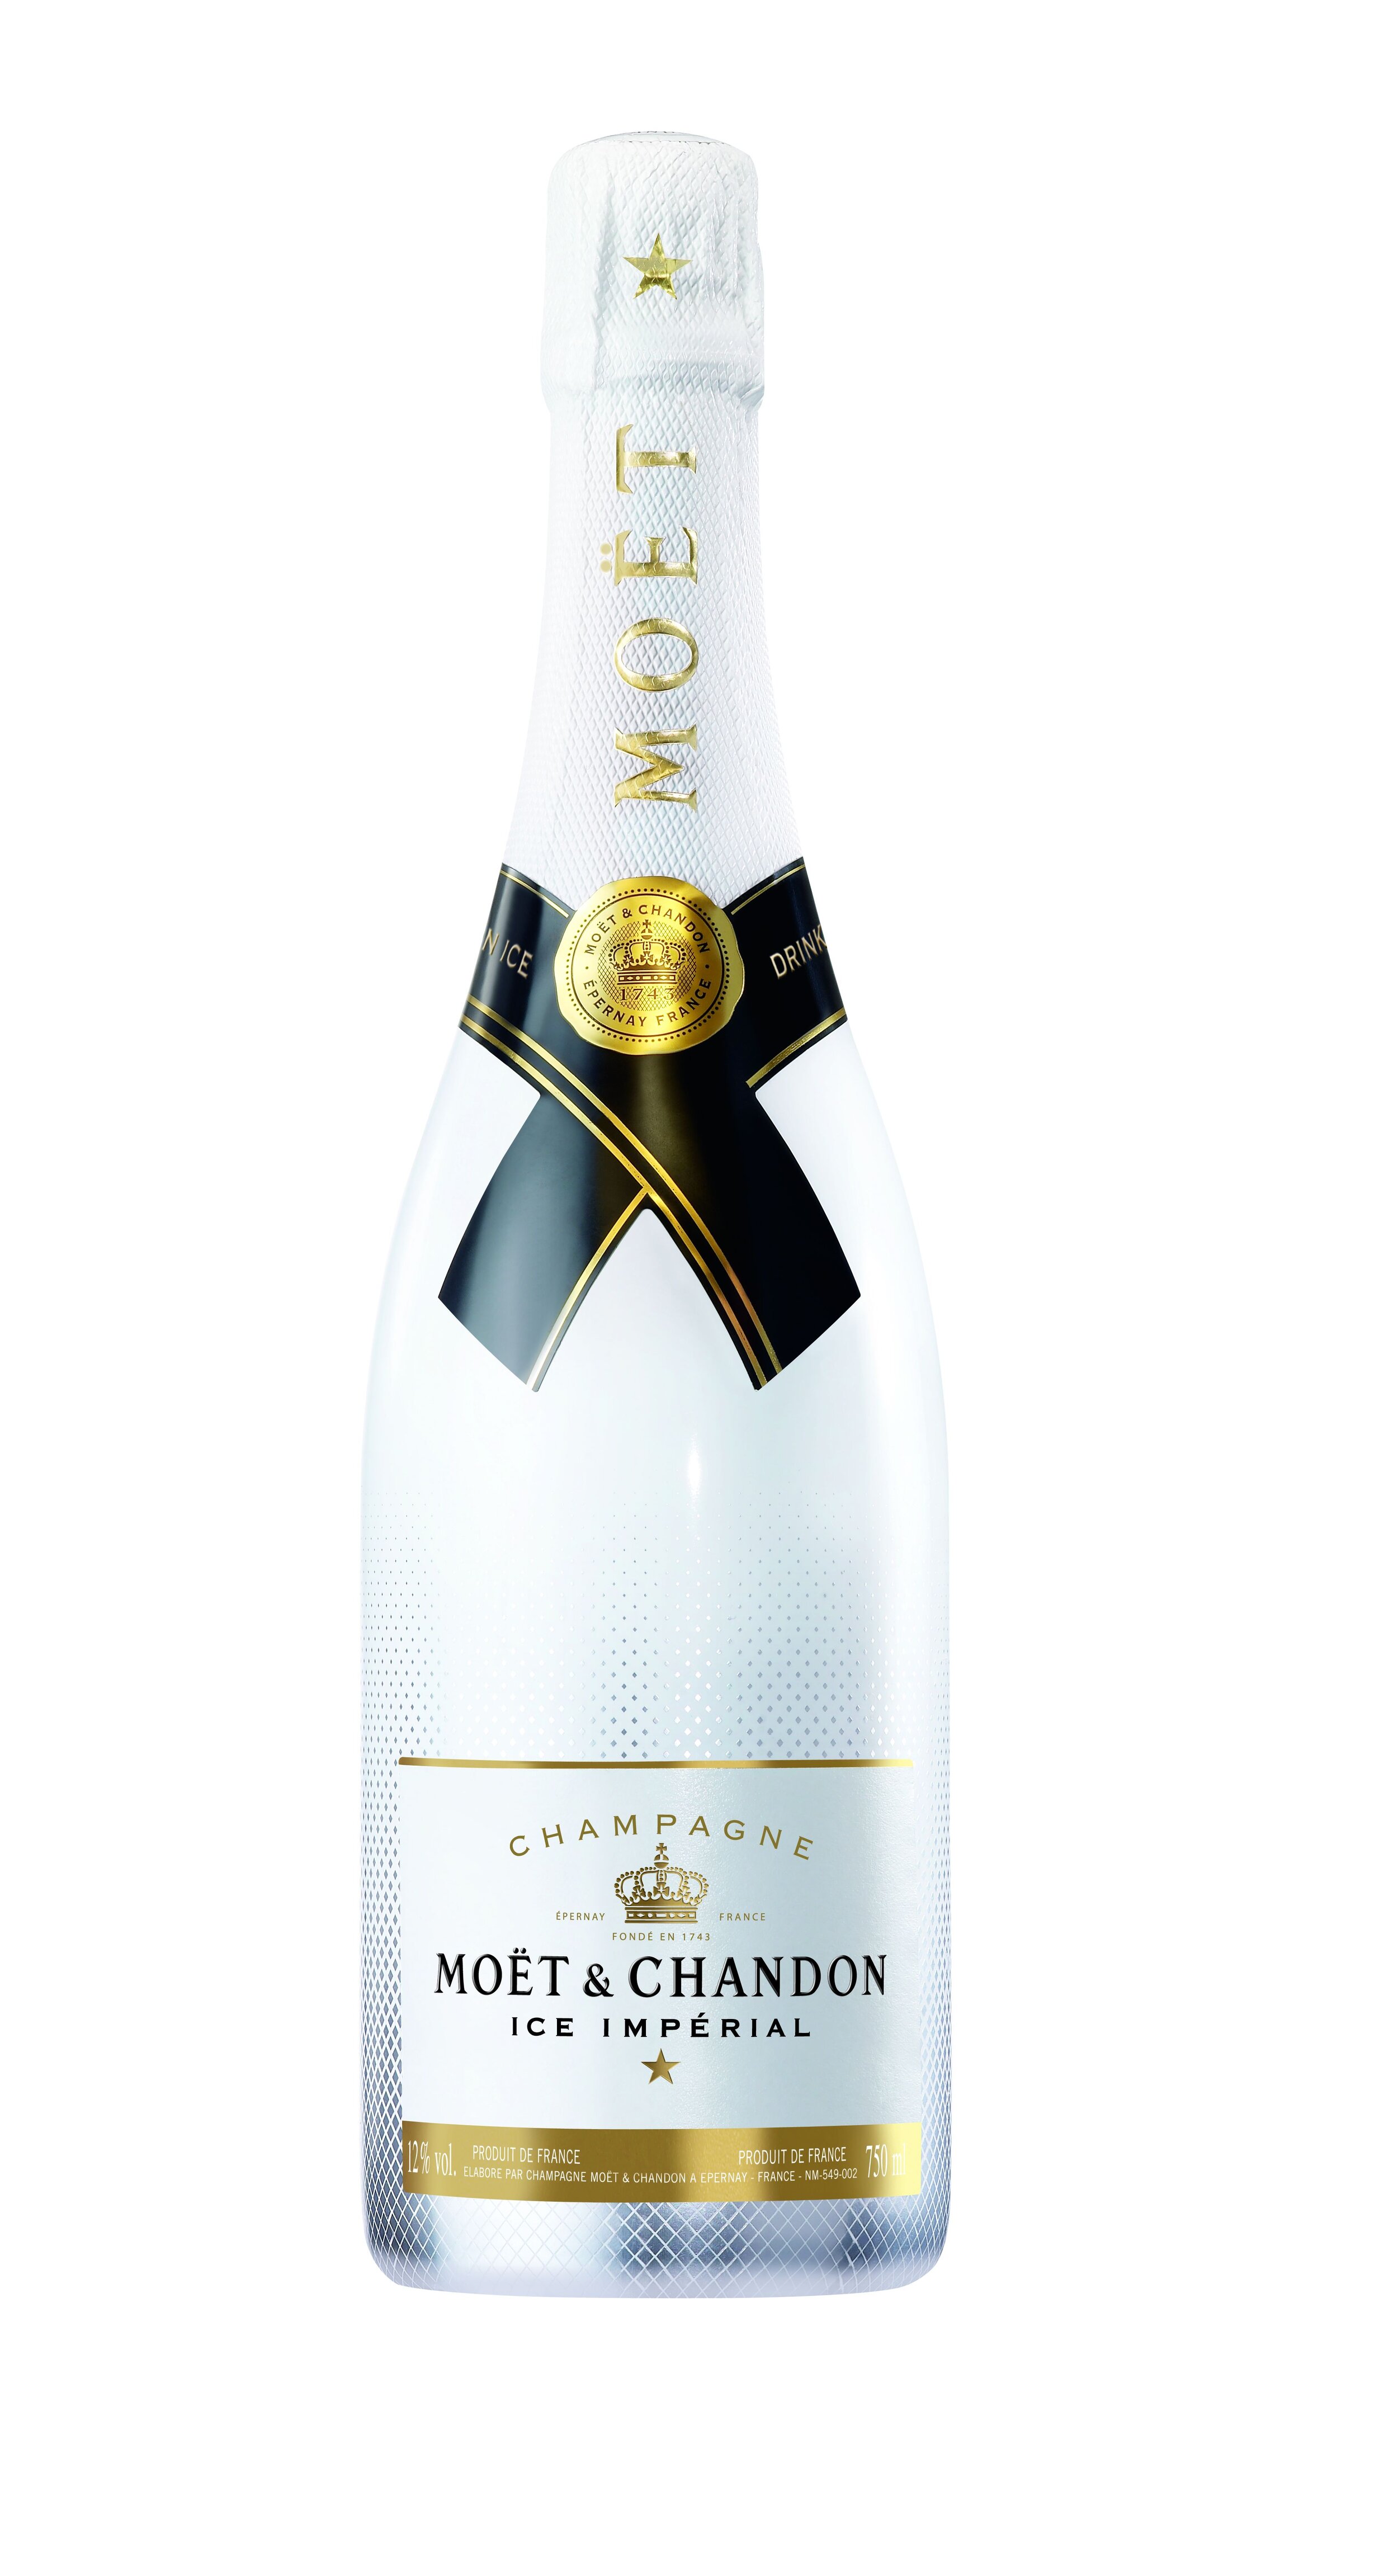 French champagne group Moet Hennessy launches 'made in India